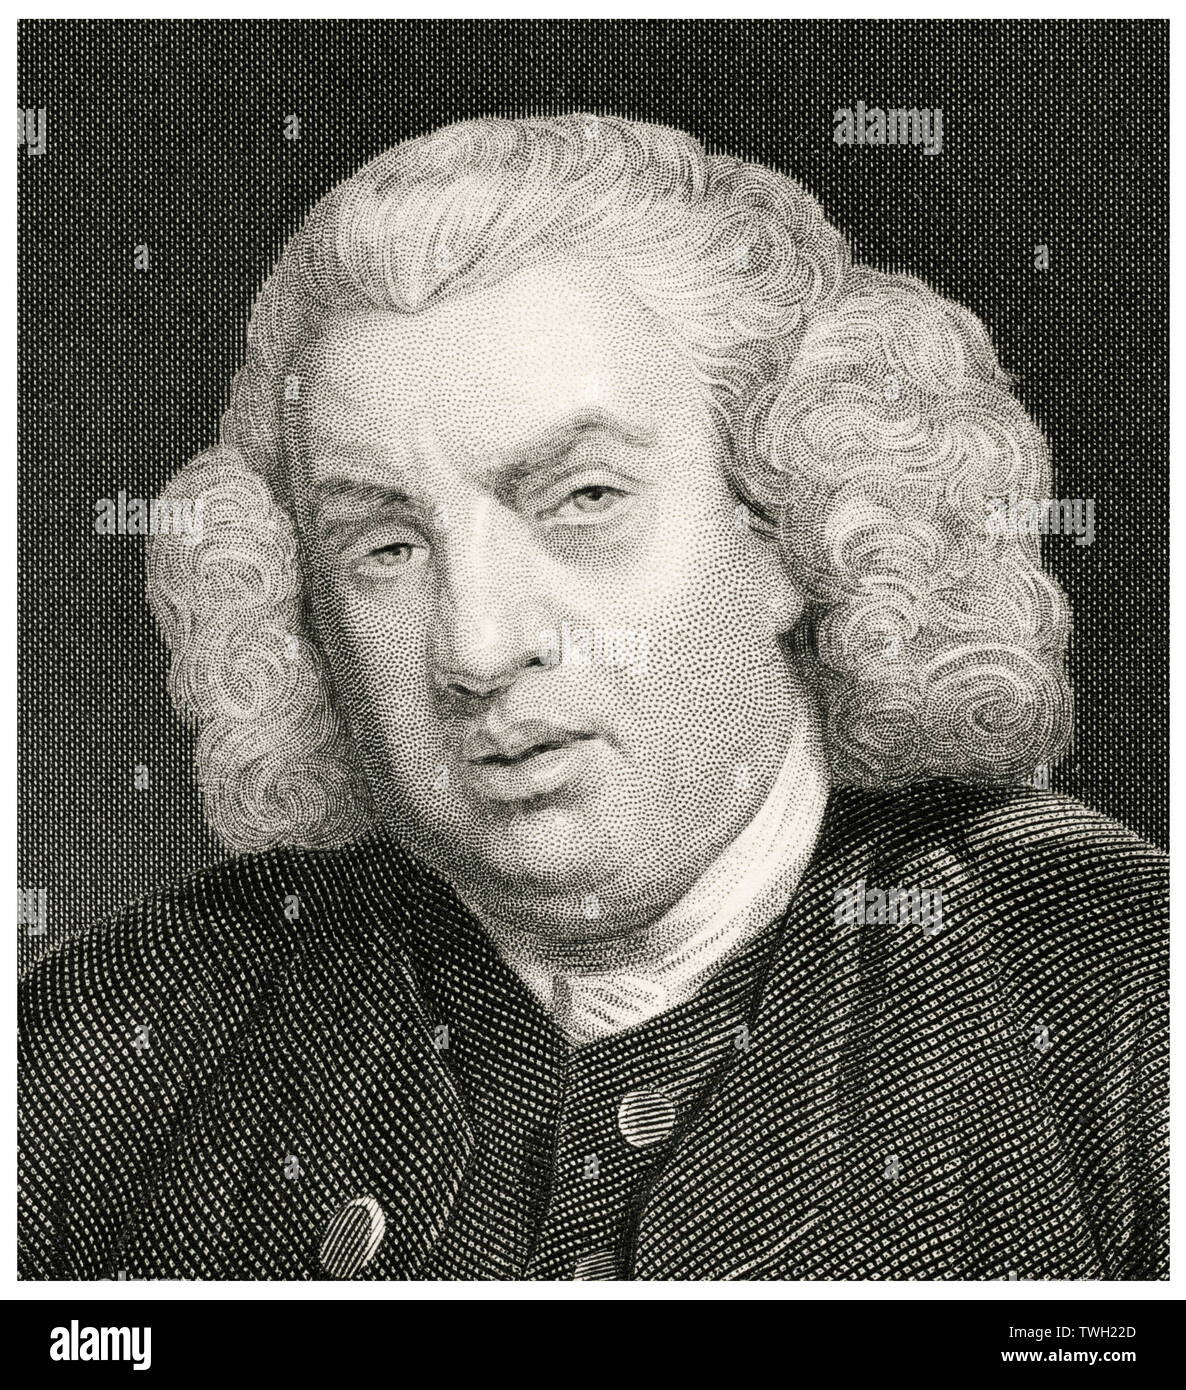 Samuel Johnson(1709-840), 18th Century English Writer, Head and Shoulders Portrait, Steel Engraving, Portrait Gallery of Eminent Men and Women of Europe and America by Evert A. Duyckinck, Published by Henry J. Johnson, Johnson, Wilson & Company, New York, 1873 Stock Photo